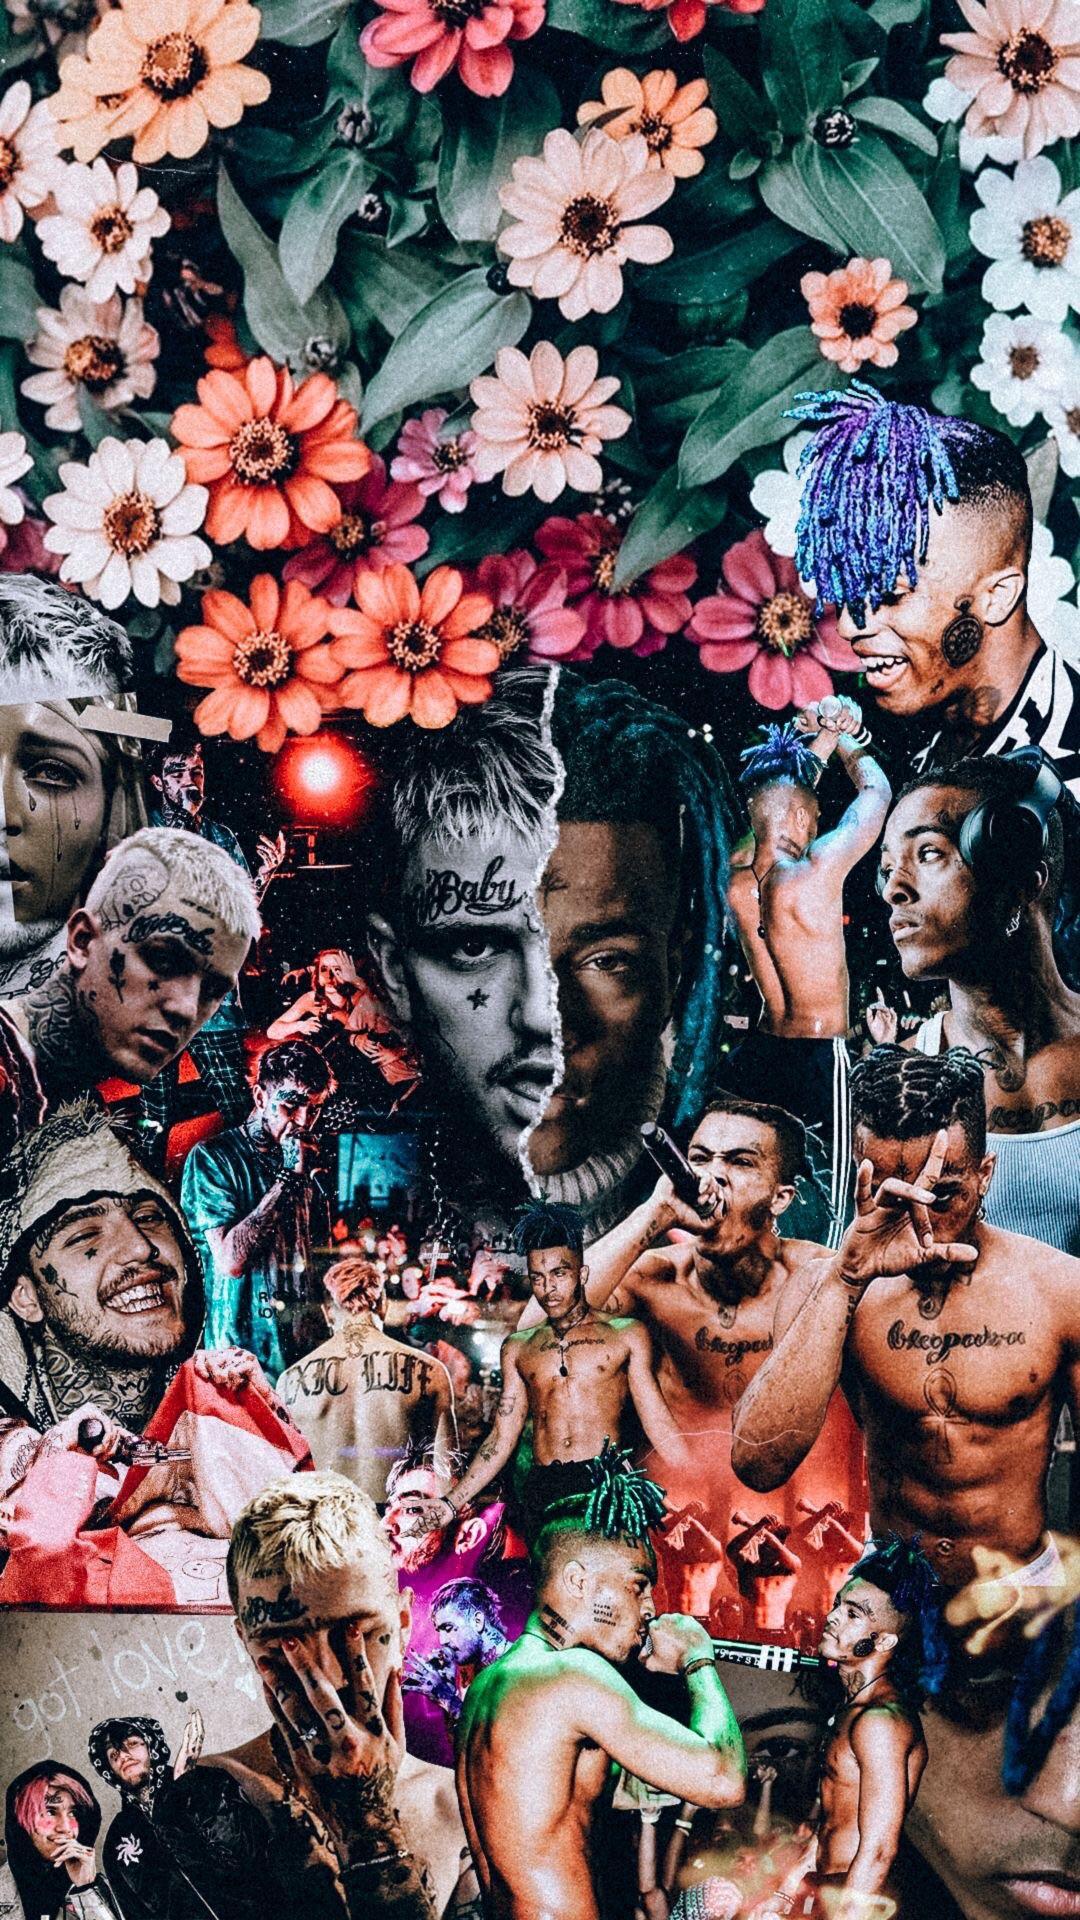 XXXTENTACION and LiL PeeP wallpaper! Found this dope shit